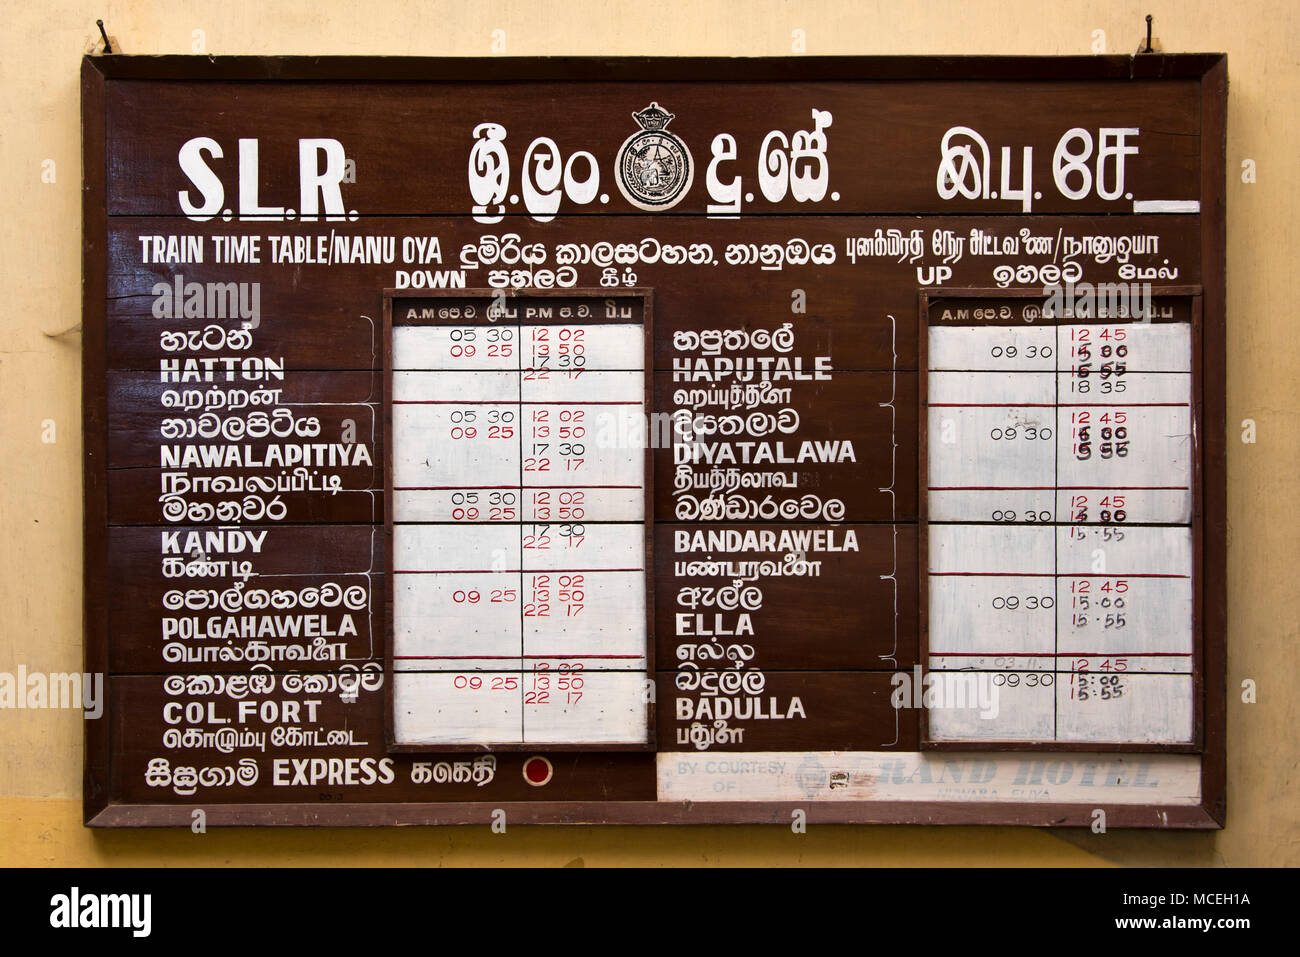 Horizontal view of the hand written timetable at Nanu-oya Train Station in the highlands of Sri Lanka. Stock Photo